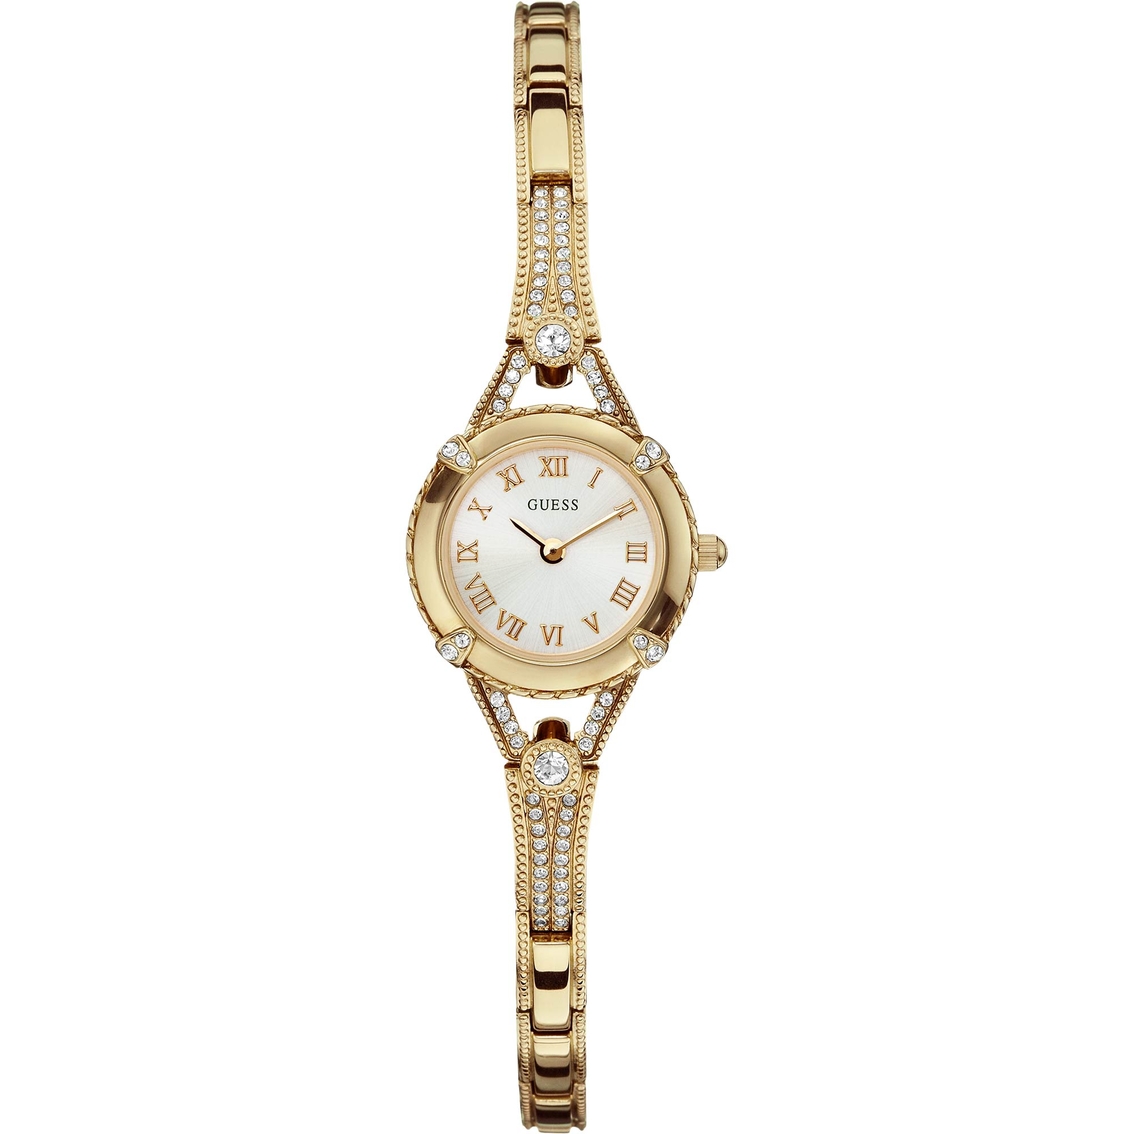 Guess Women's Petite Crystal Watch 22mm U0135l2 Goldtone Band | Jewelry & Watches | Shop The Exchange